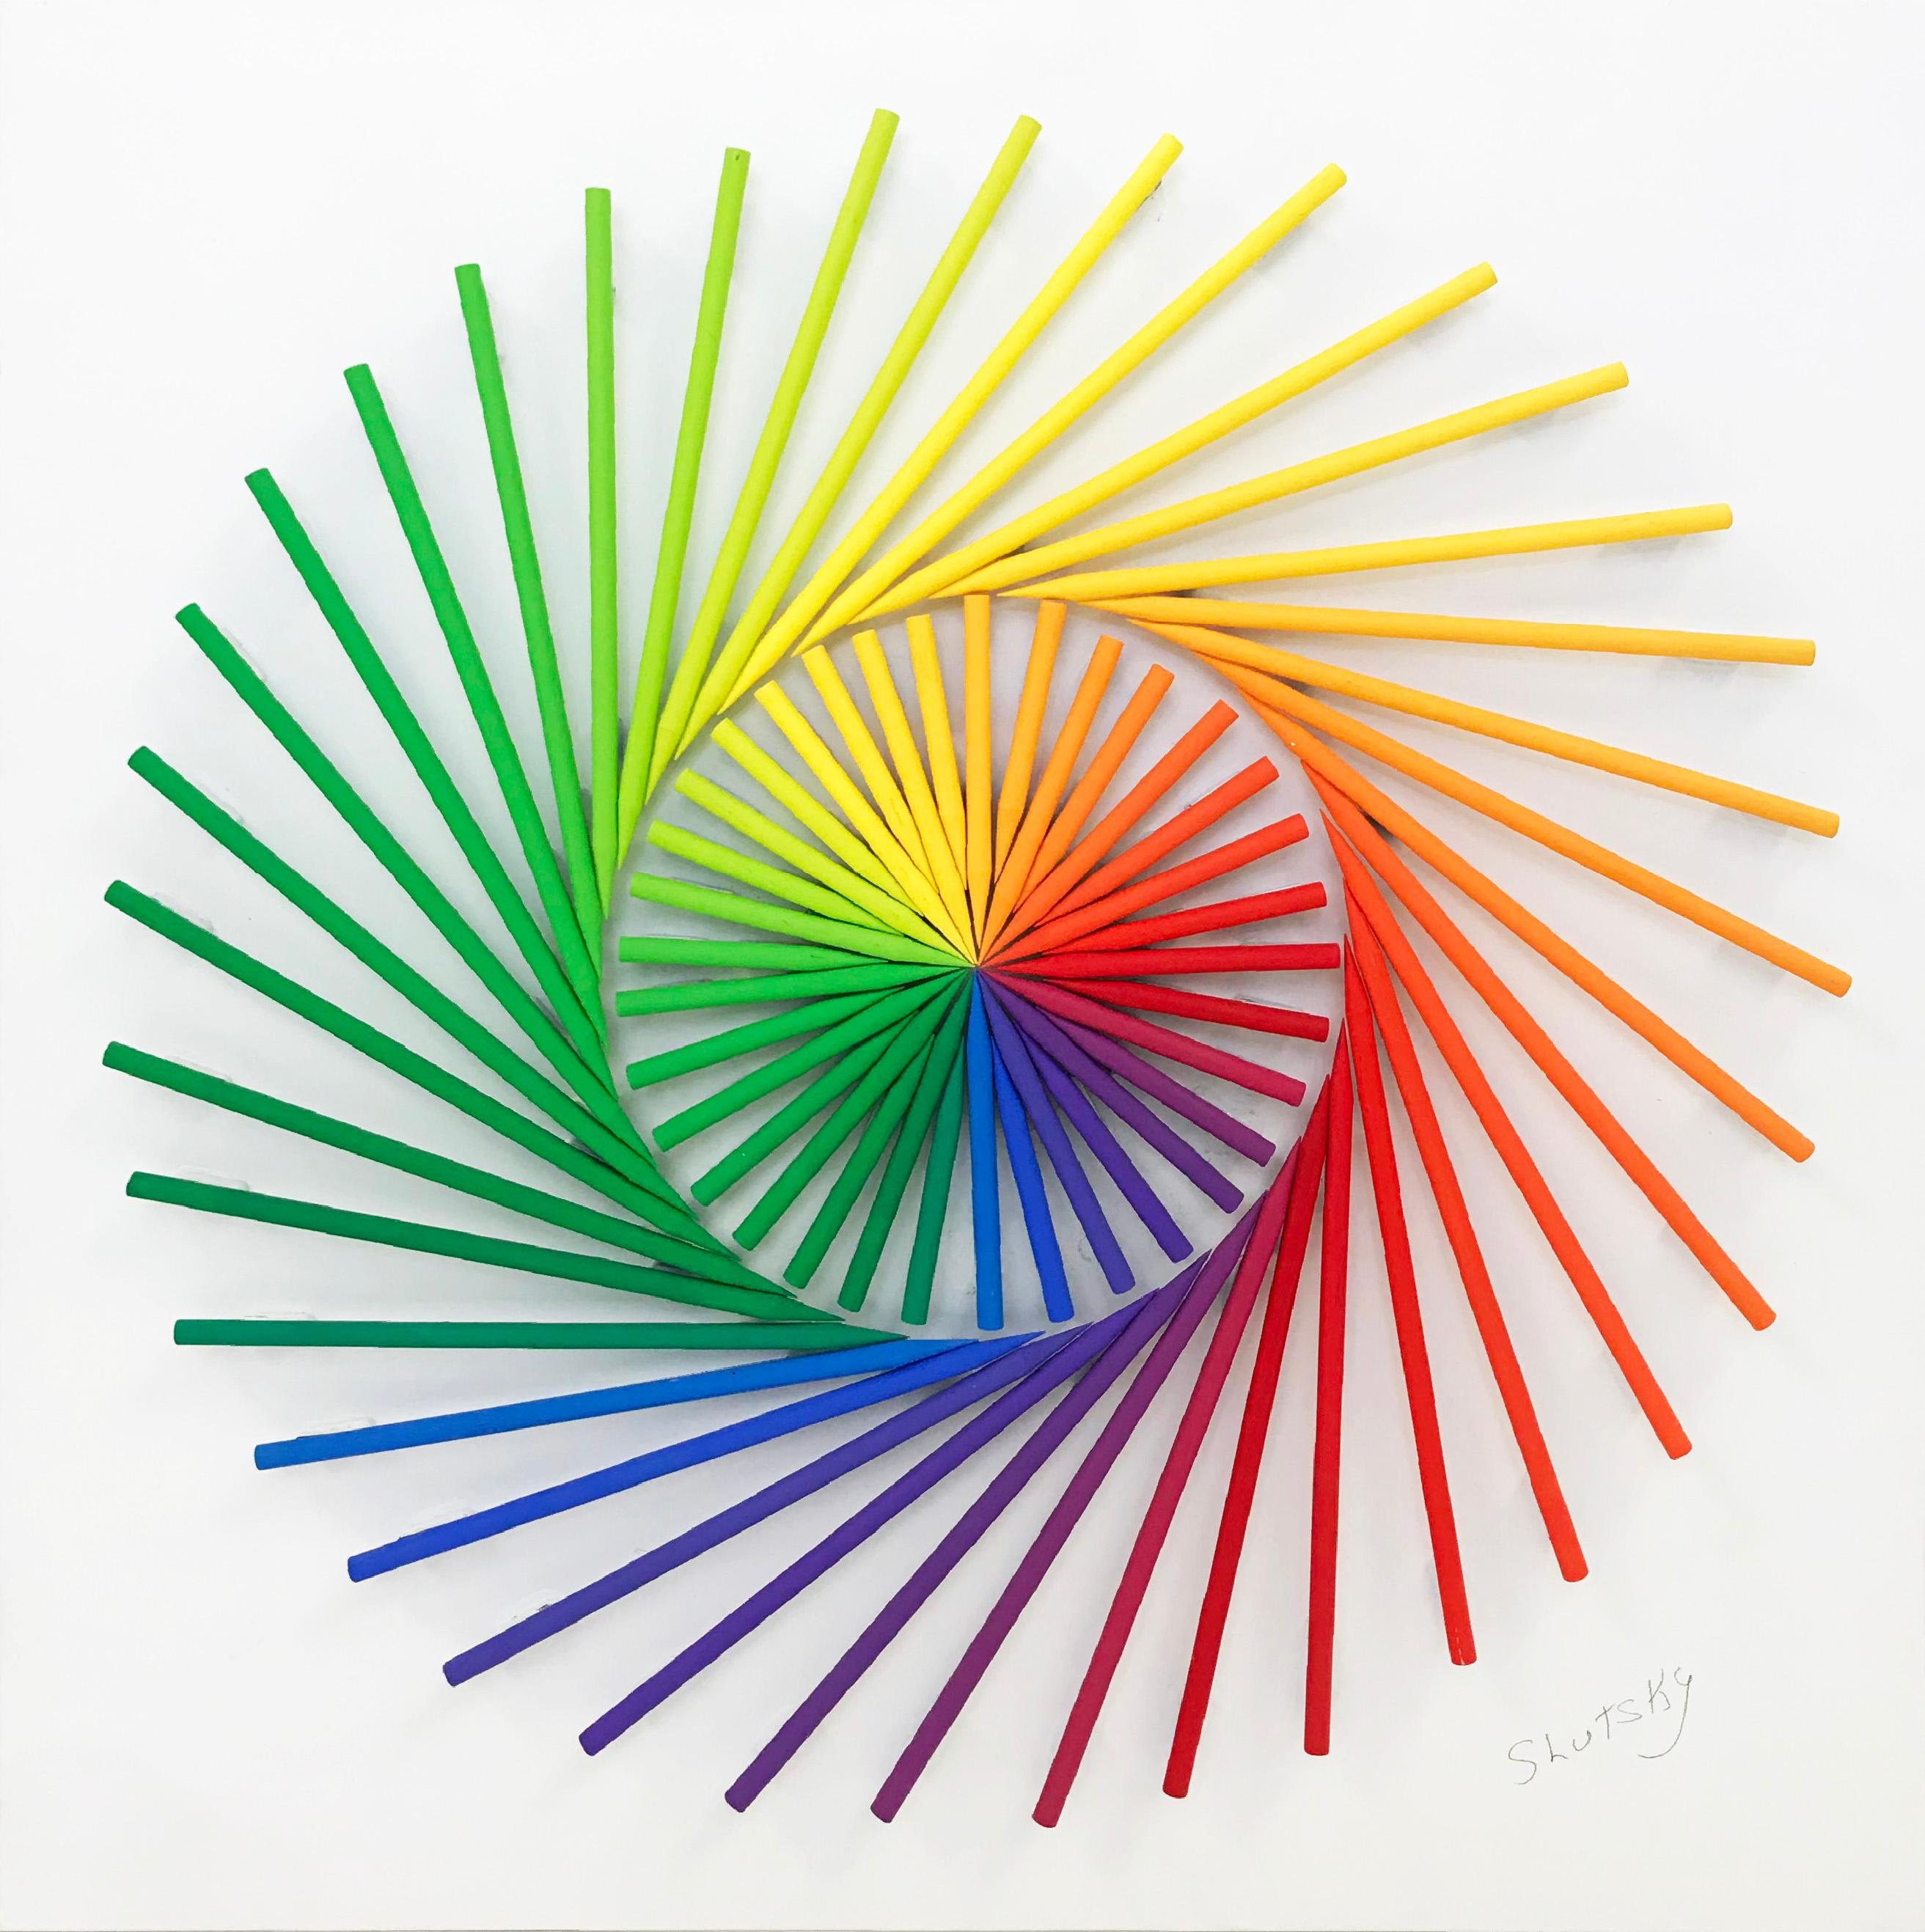 PINWHEEL (DIMENSIONAL PIECES OF WOOD WITH MAGNETS) - Mixed Media Art by Stan Slutsky